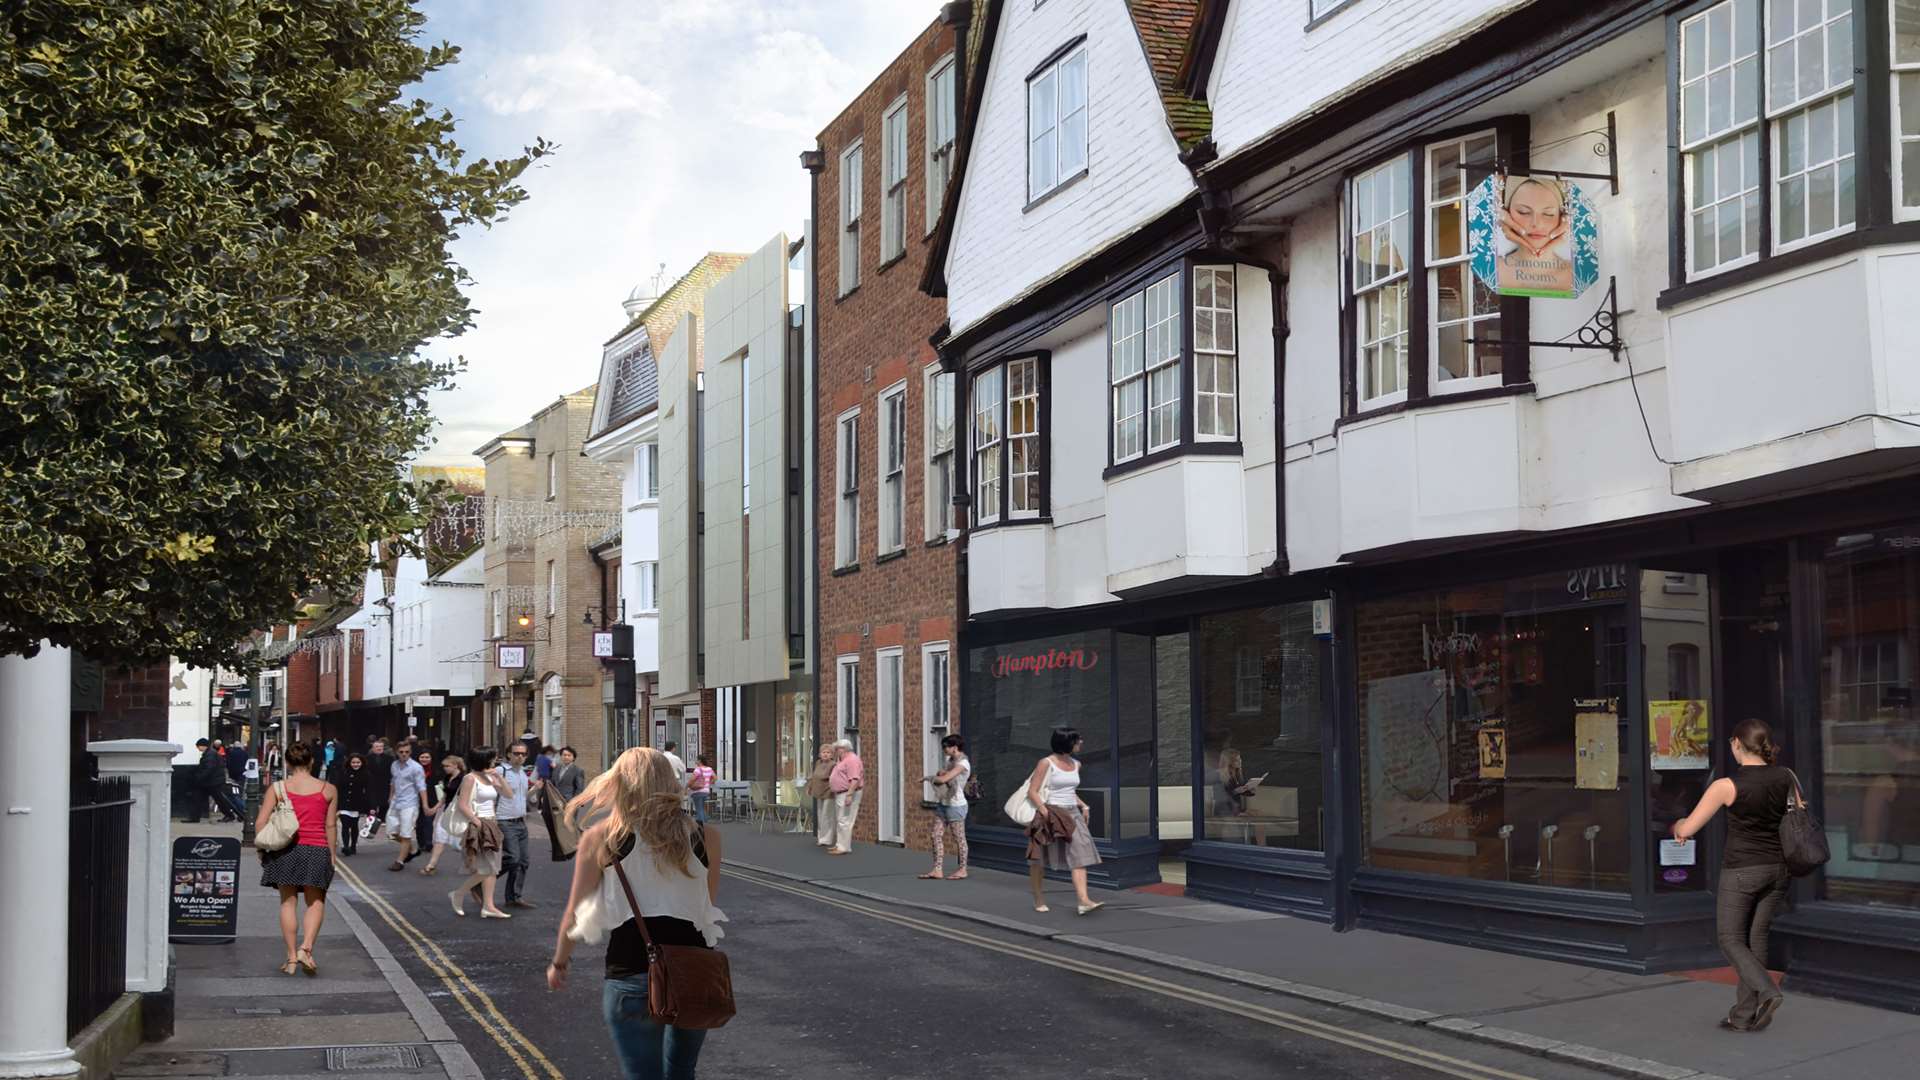 Proposals for the site on St Margaret's Street